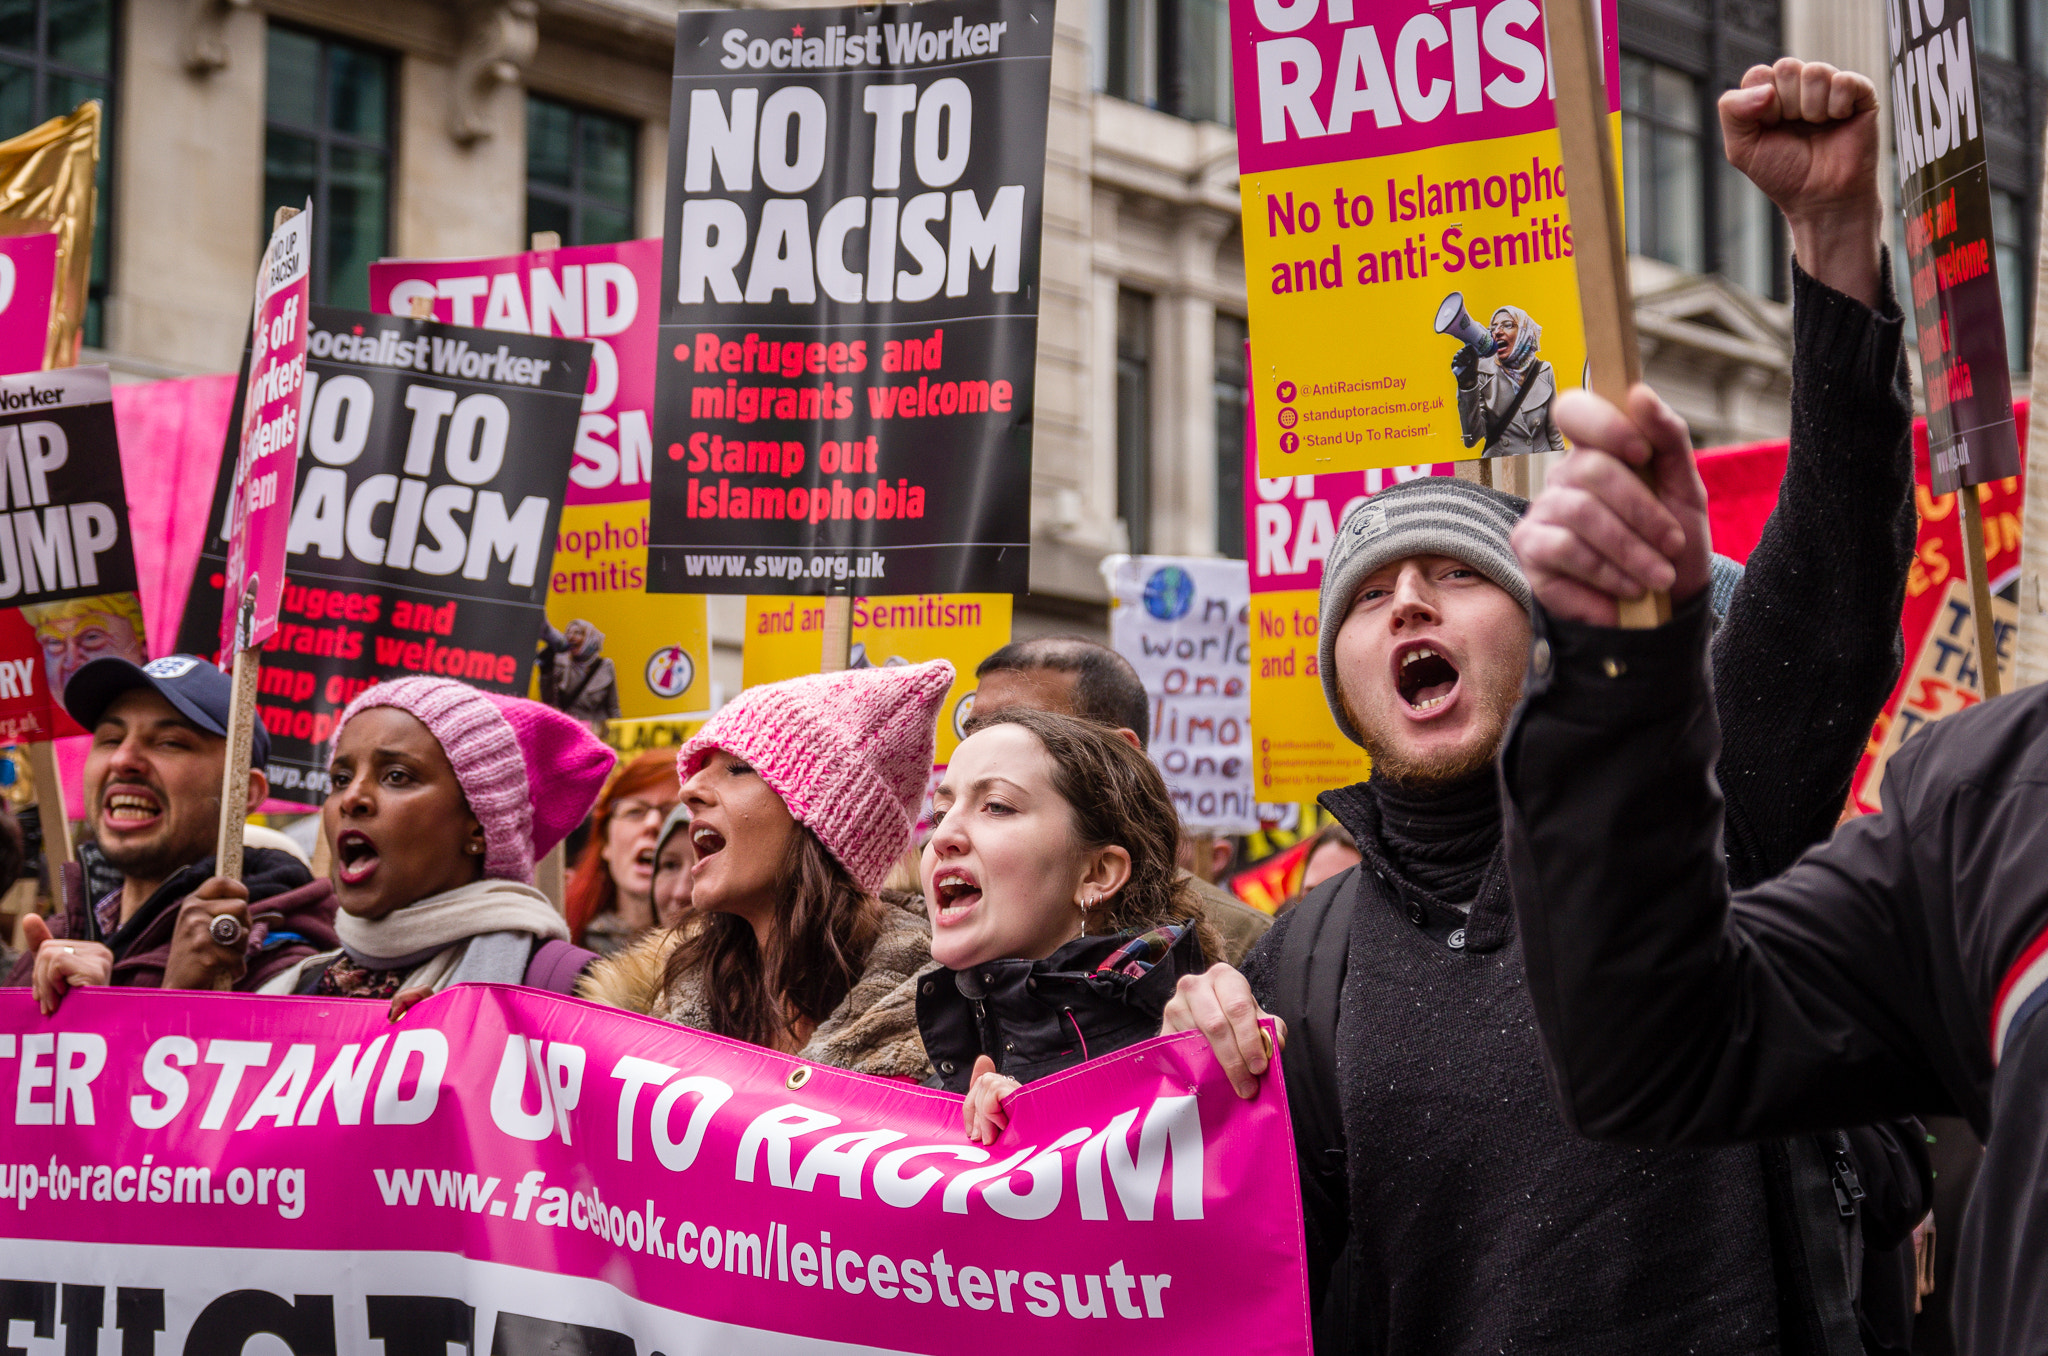 Pentax K-30 + Pentax smc DA* 16-50mm F2.8 ED AL (IF) SDM sample photo. Stand up to racism march, london, march 2017 photography